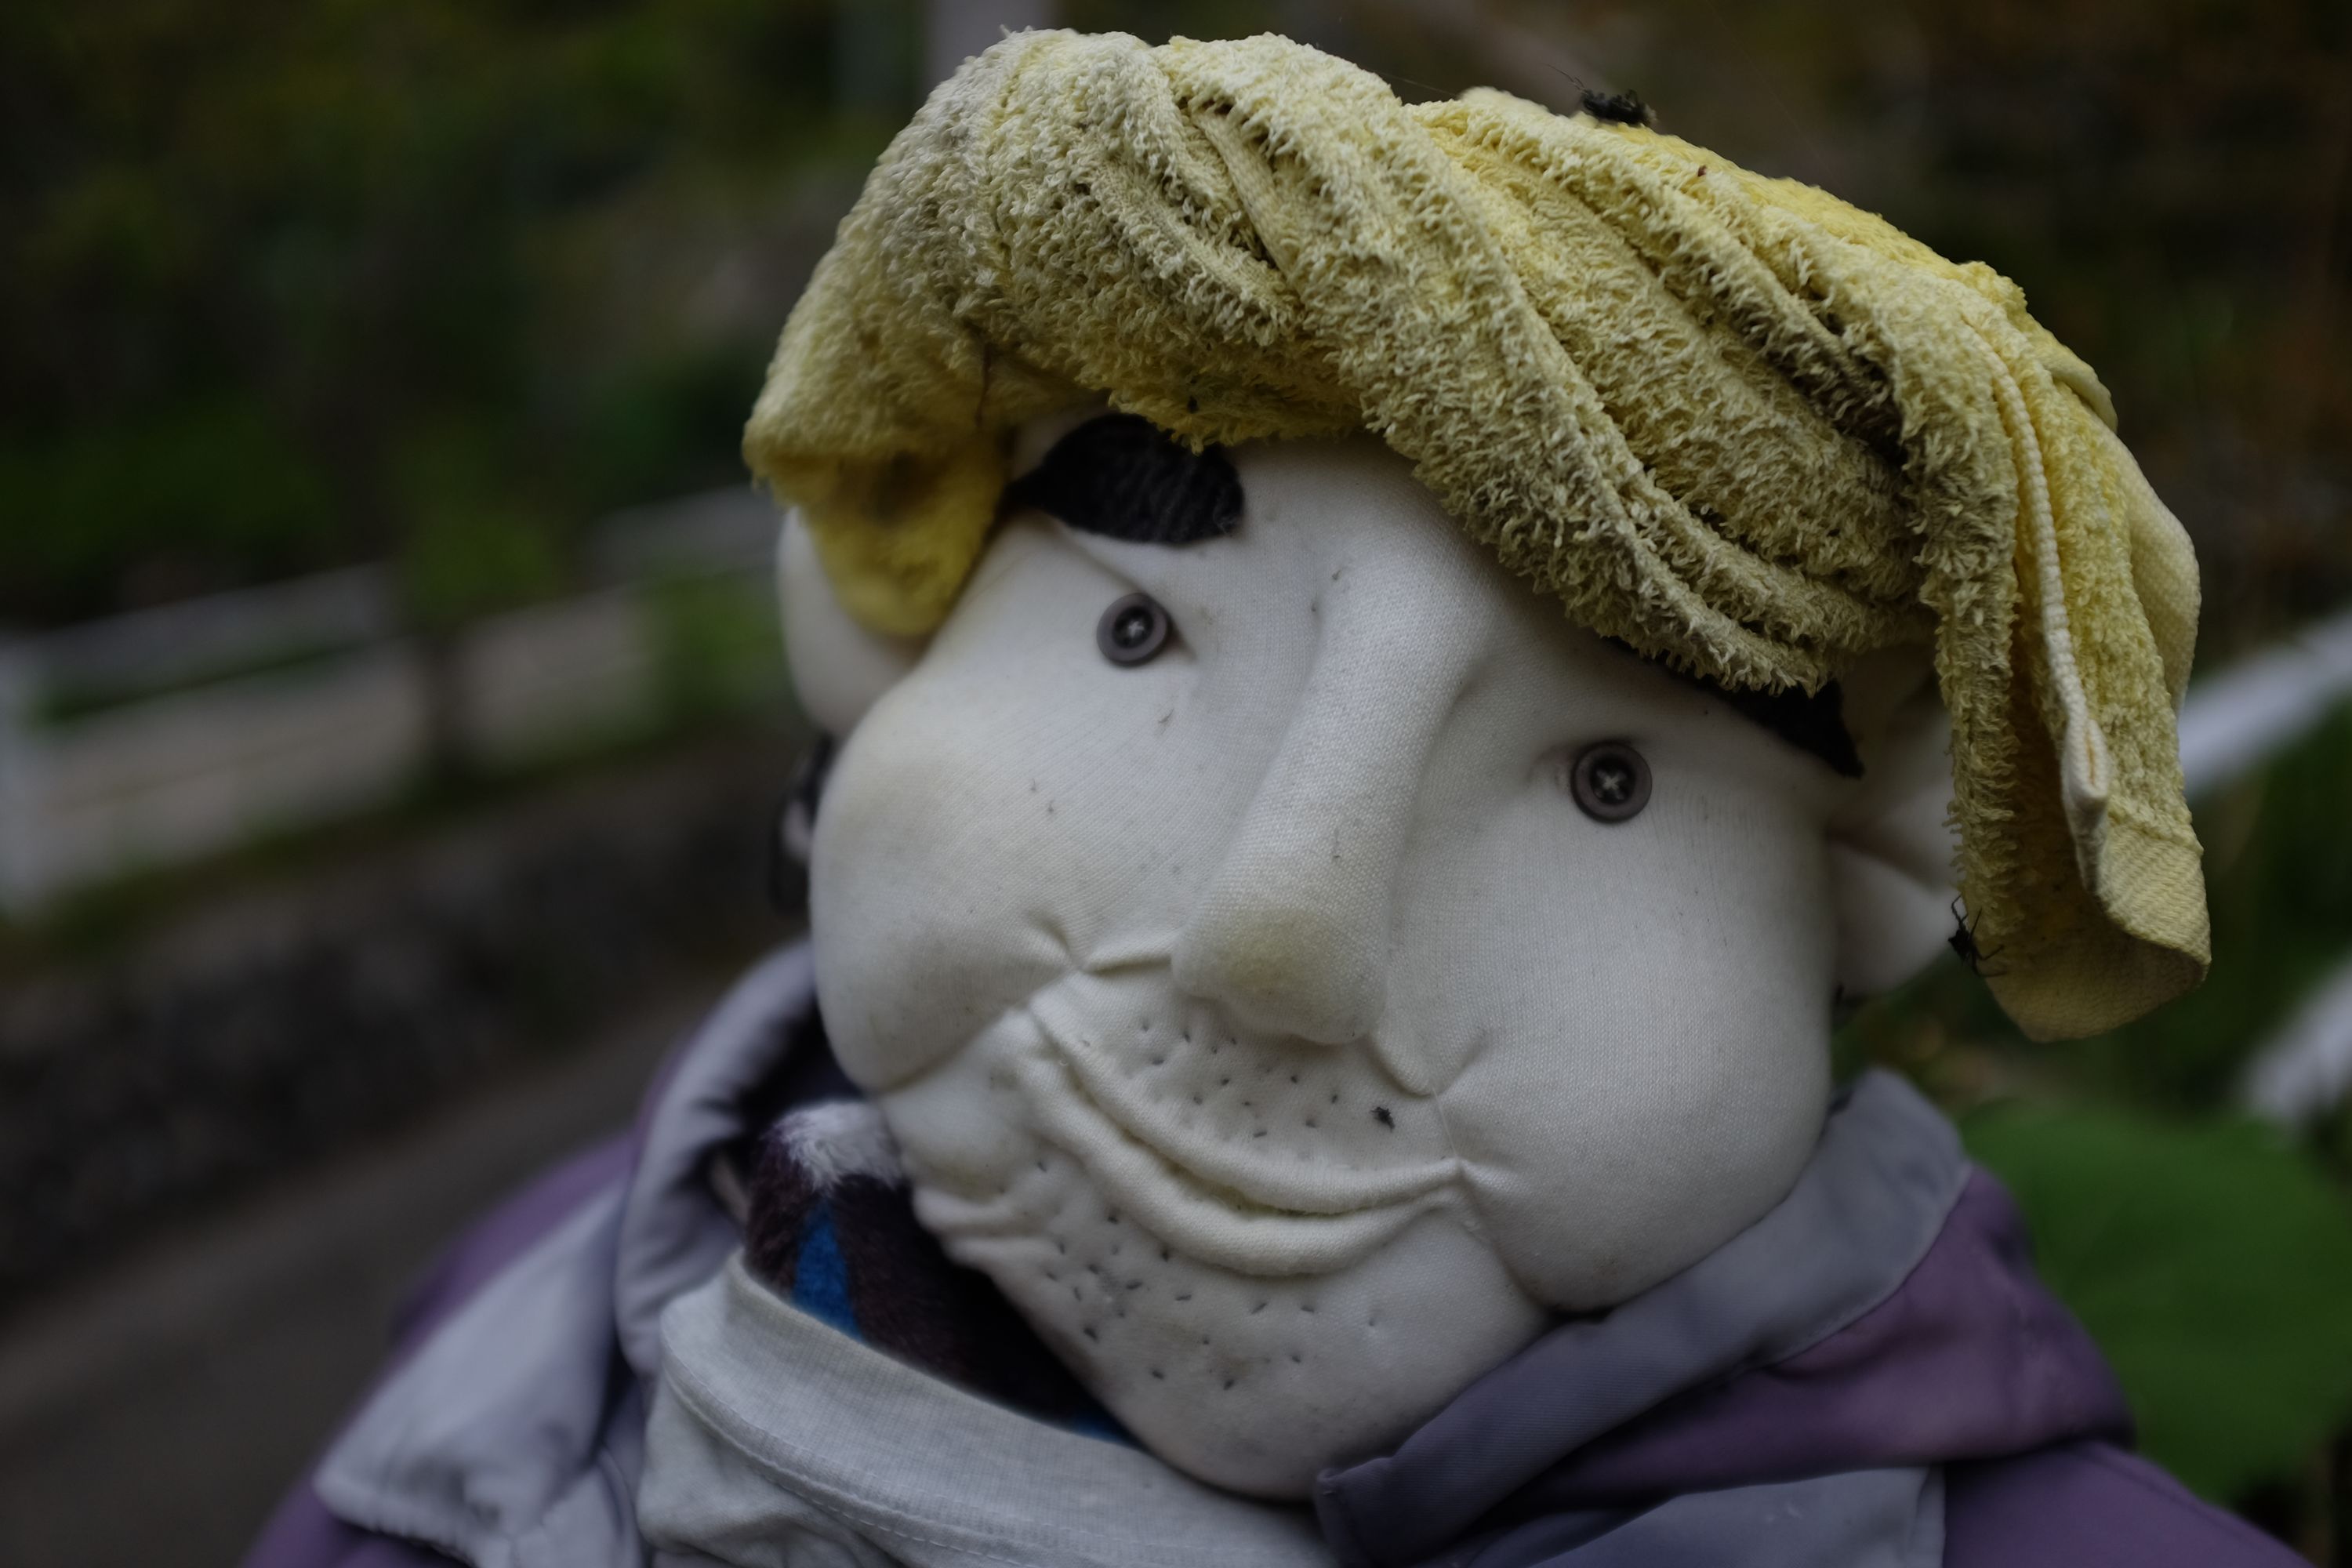 The face of a doll with a towel wrapped around his head in the Japanese manner.